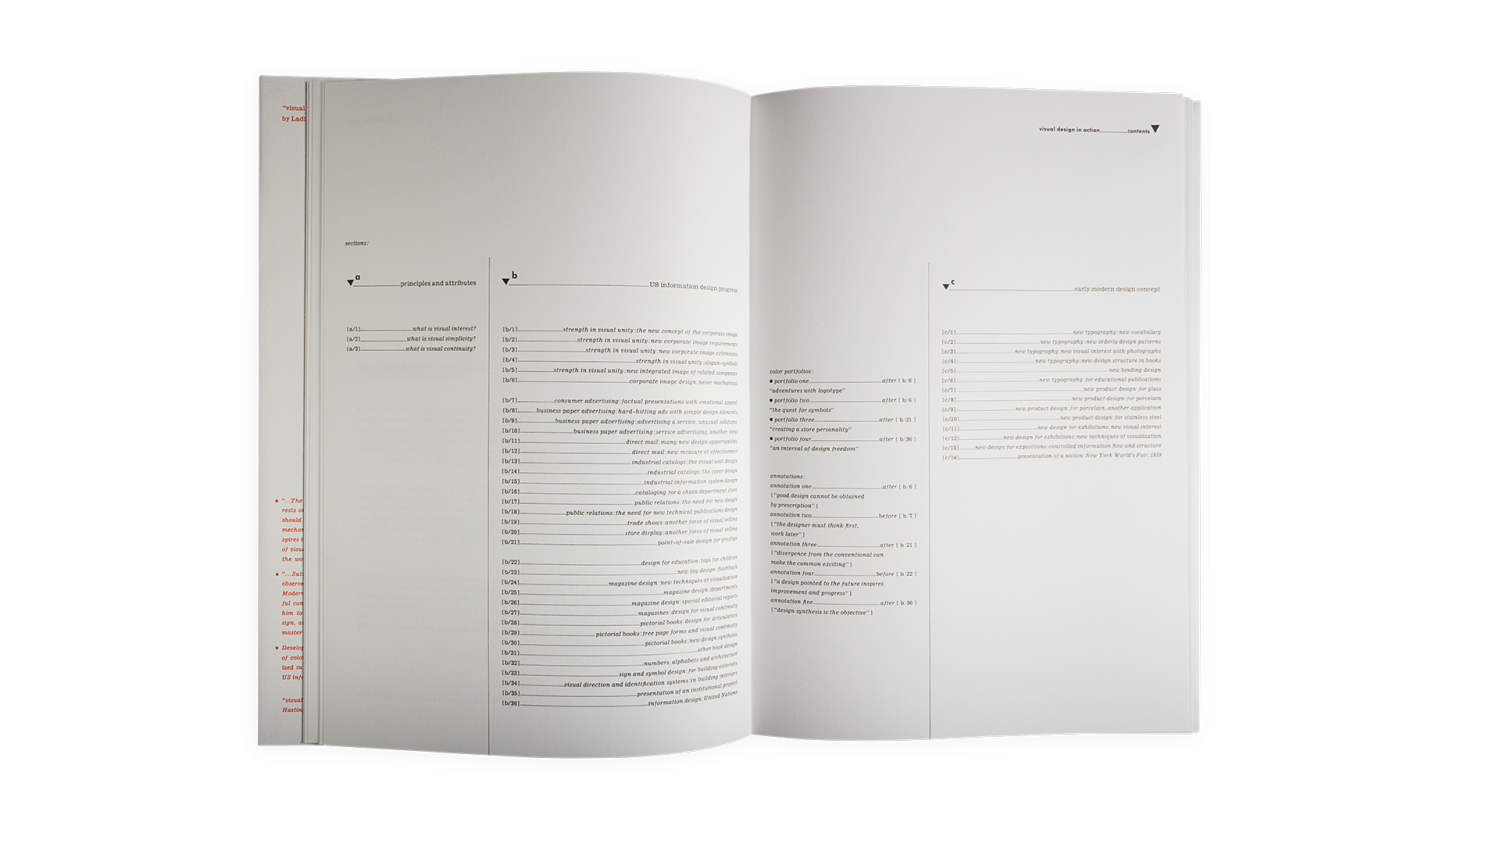 Sutnar’s table of contents uses a system of letters and numbers, rather than pages.